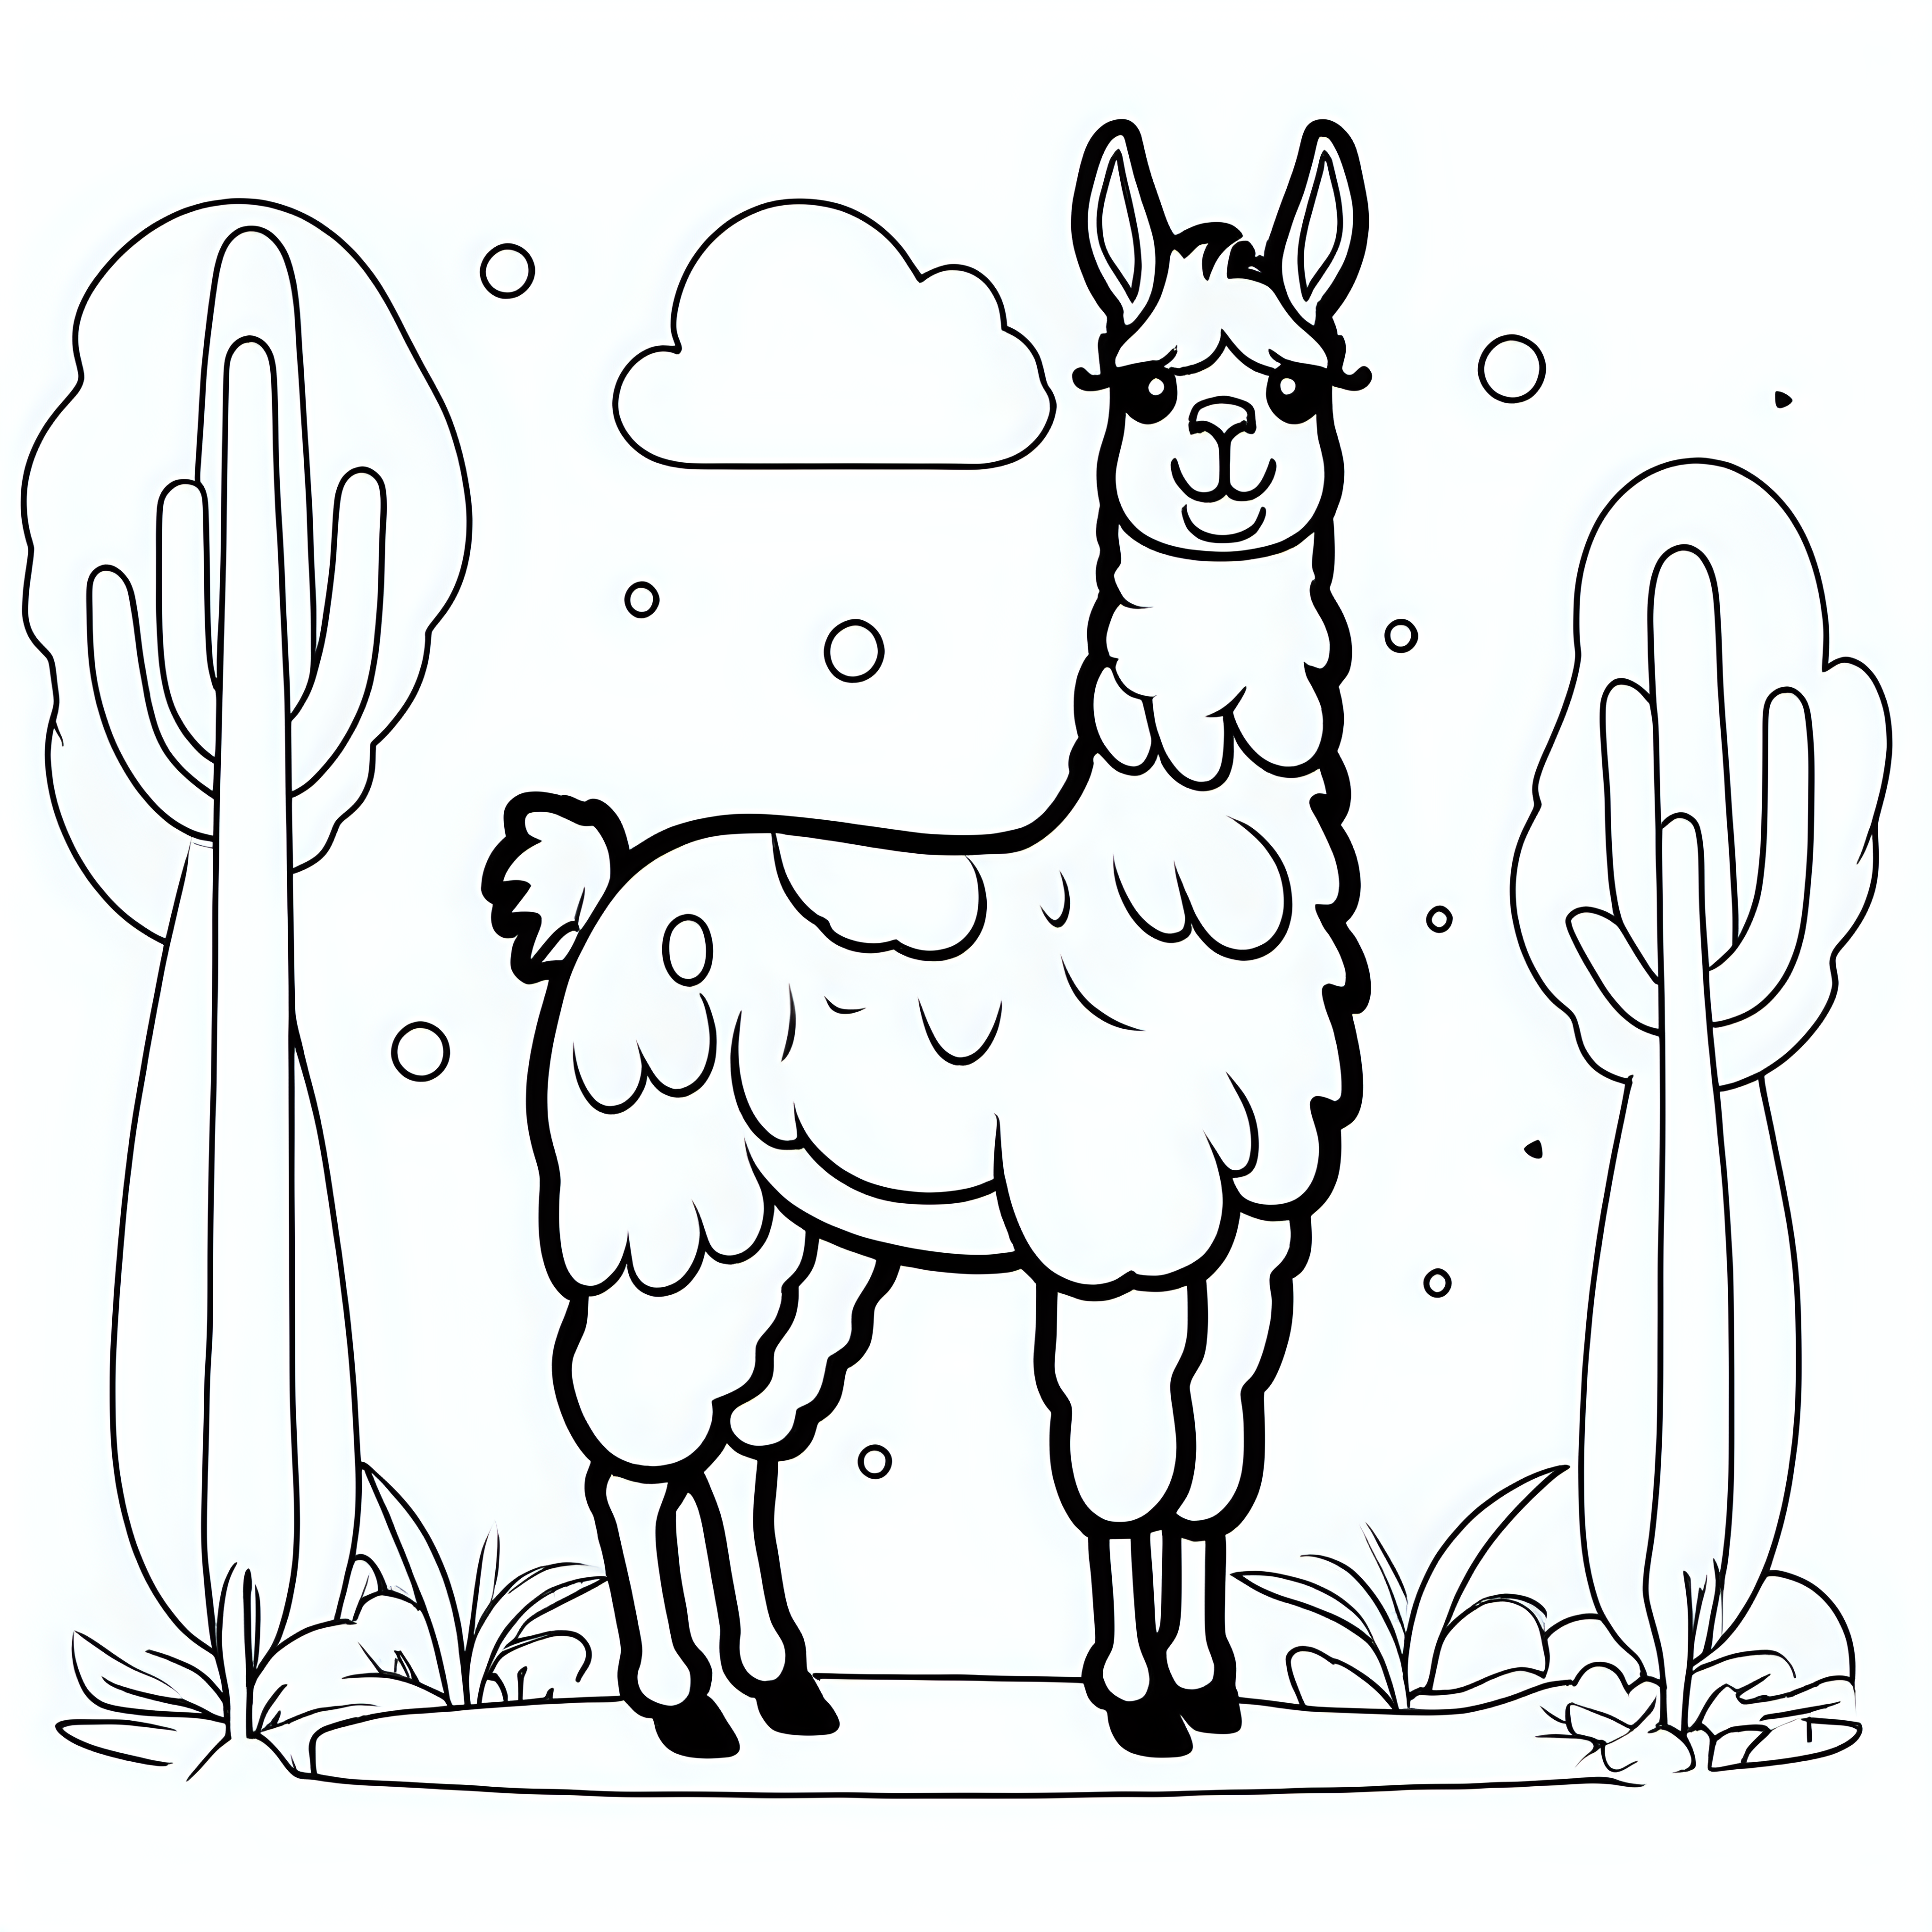 draw a cute lhama animal with only the outline in black for a coloring book for kids